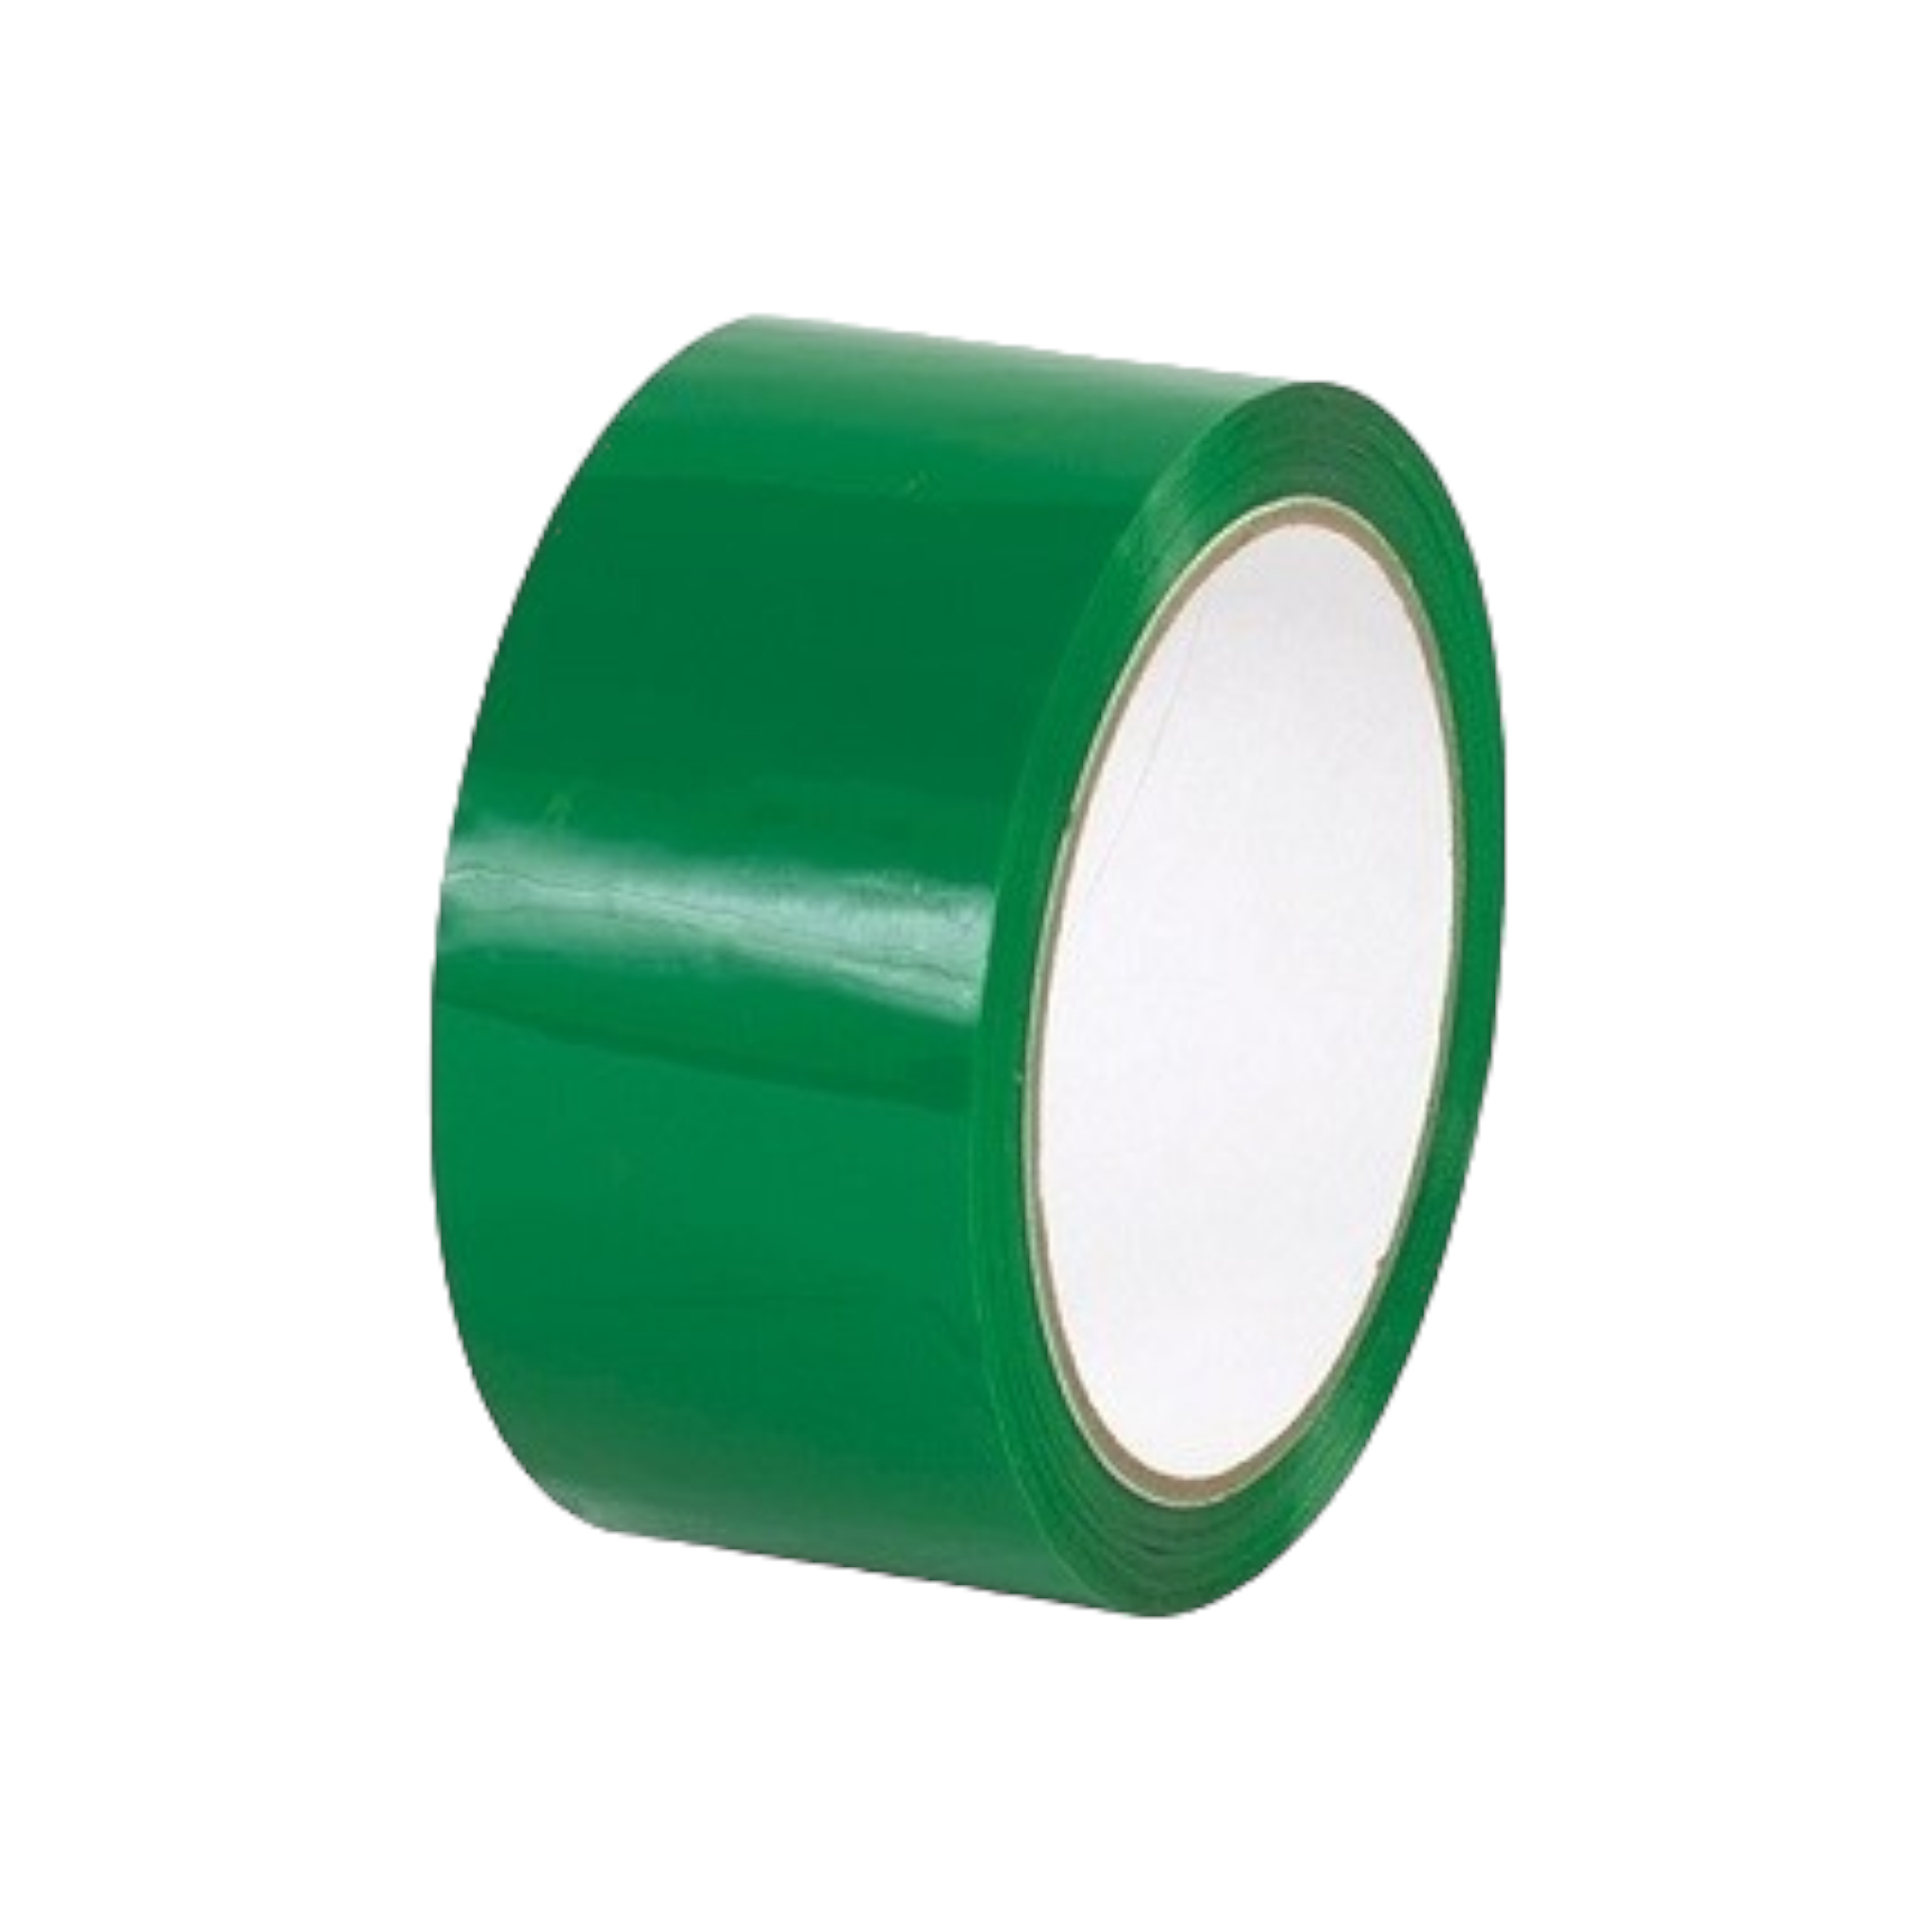 Buff Adhesive Packaging Coloured Tape 4.5cmx100m